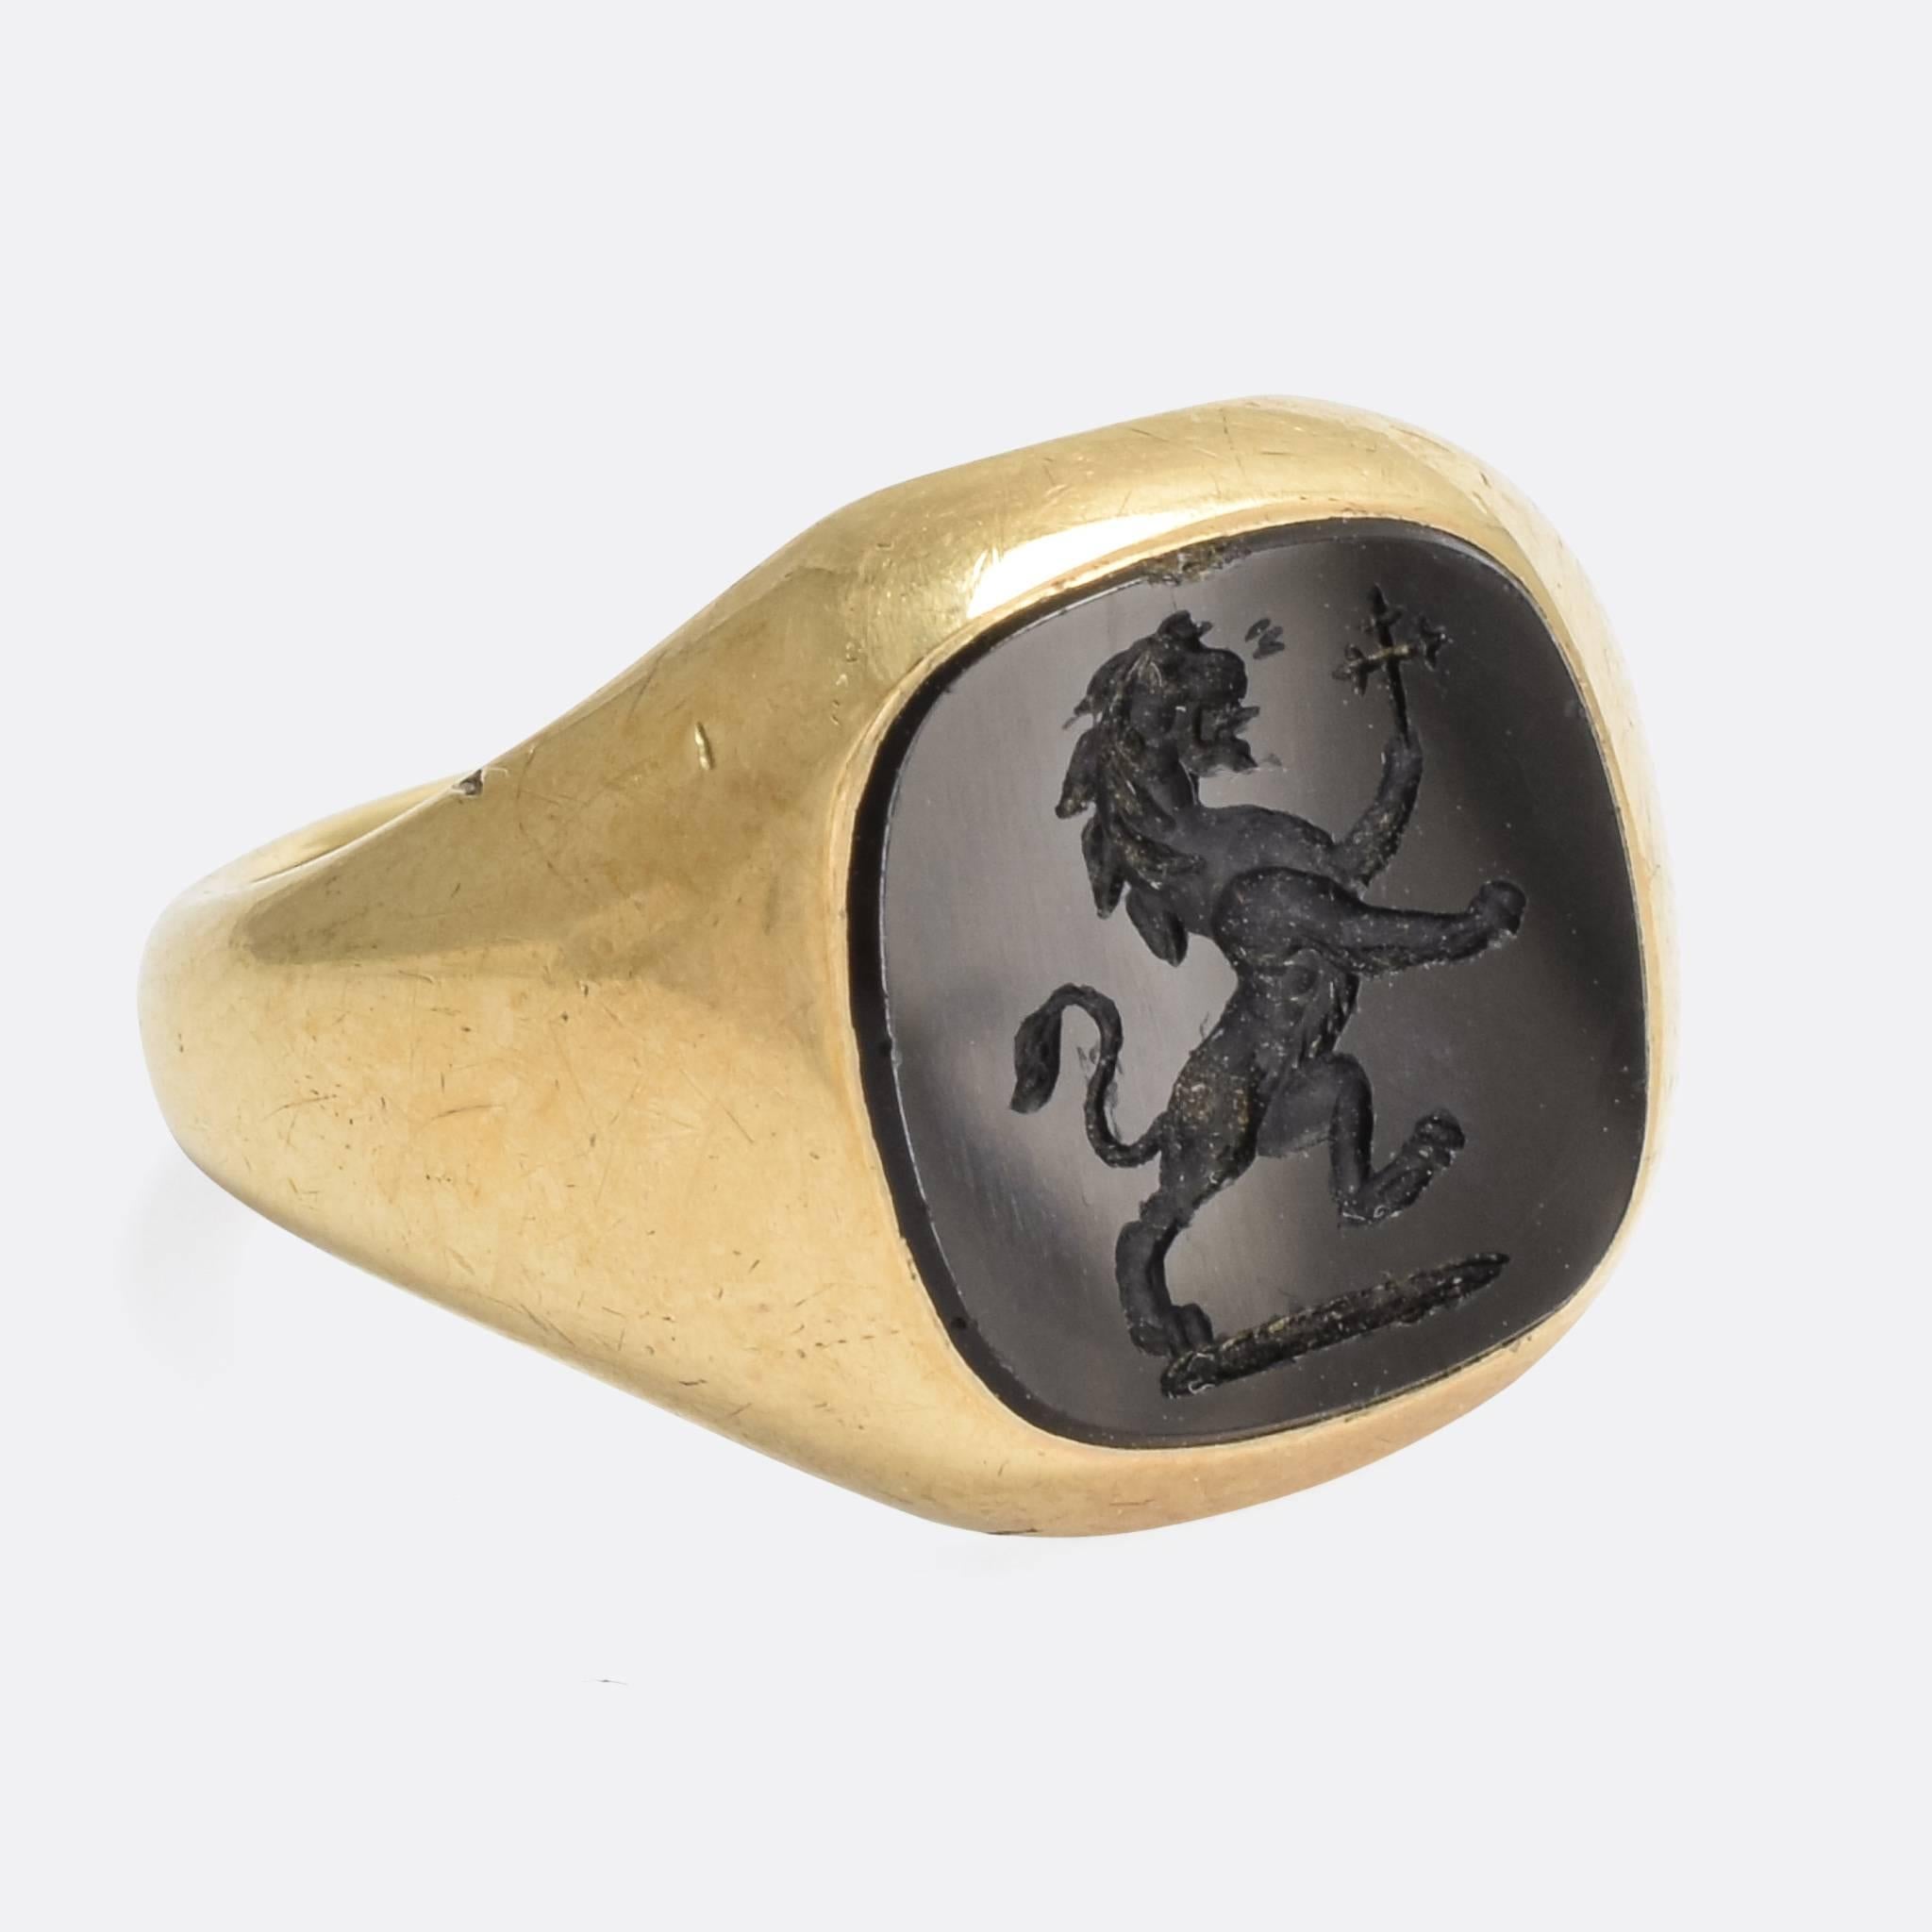 A cool antique signet ring by esteemed jewellers Charles Green & Son, who have been hand making fine quality gold and silver jewellery for over 180 years (they're still around today, as a sixth-generation family owned business).

The face has been